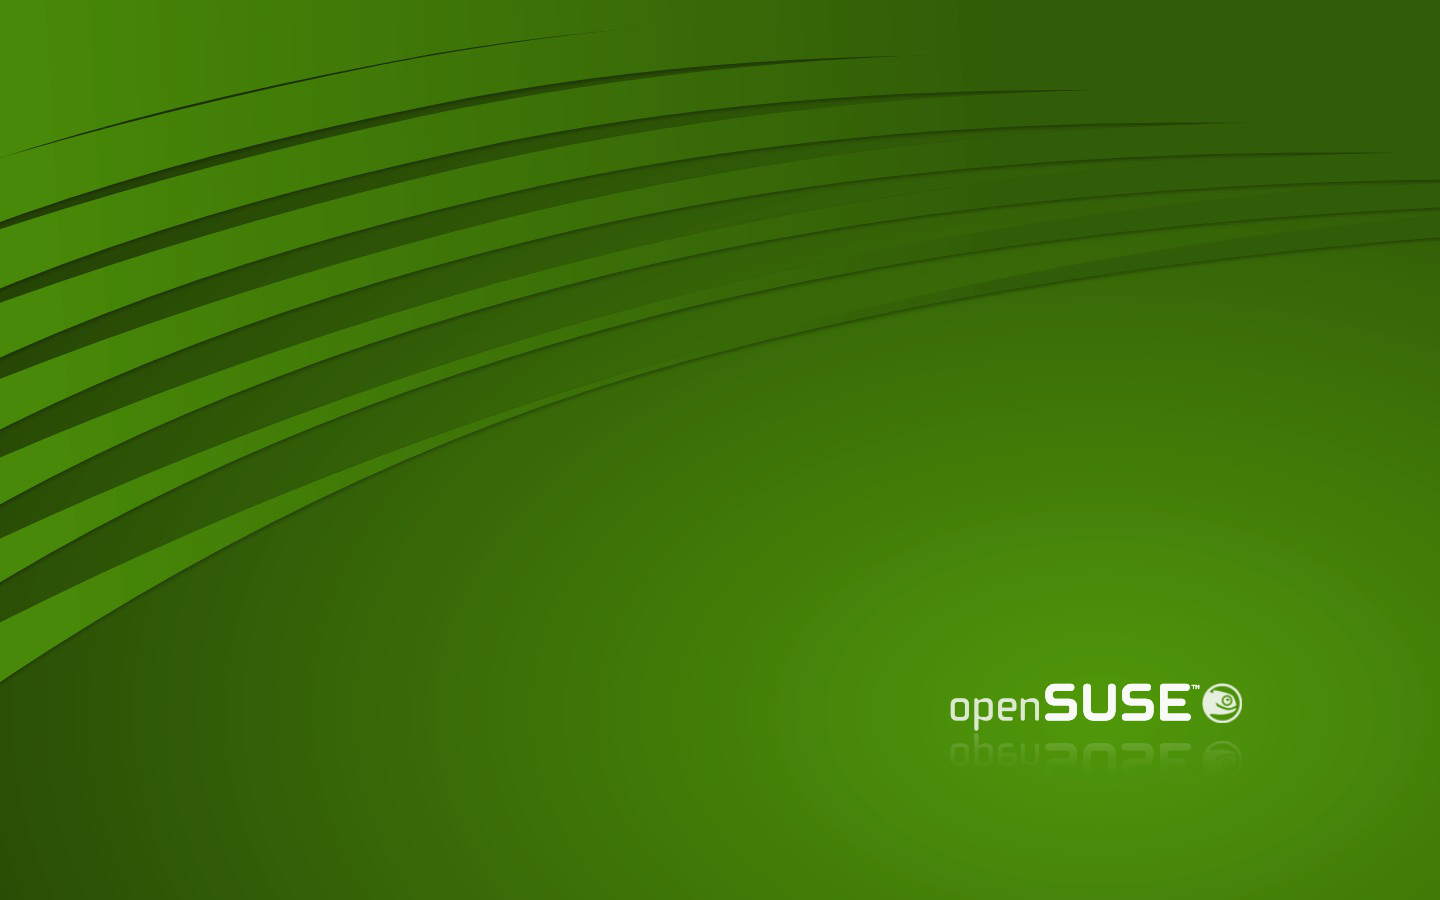 Gorgeous Opensuse Wallpaper